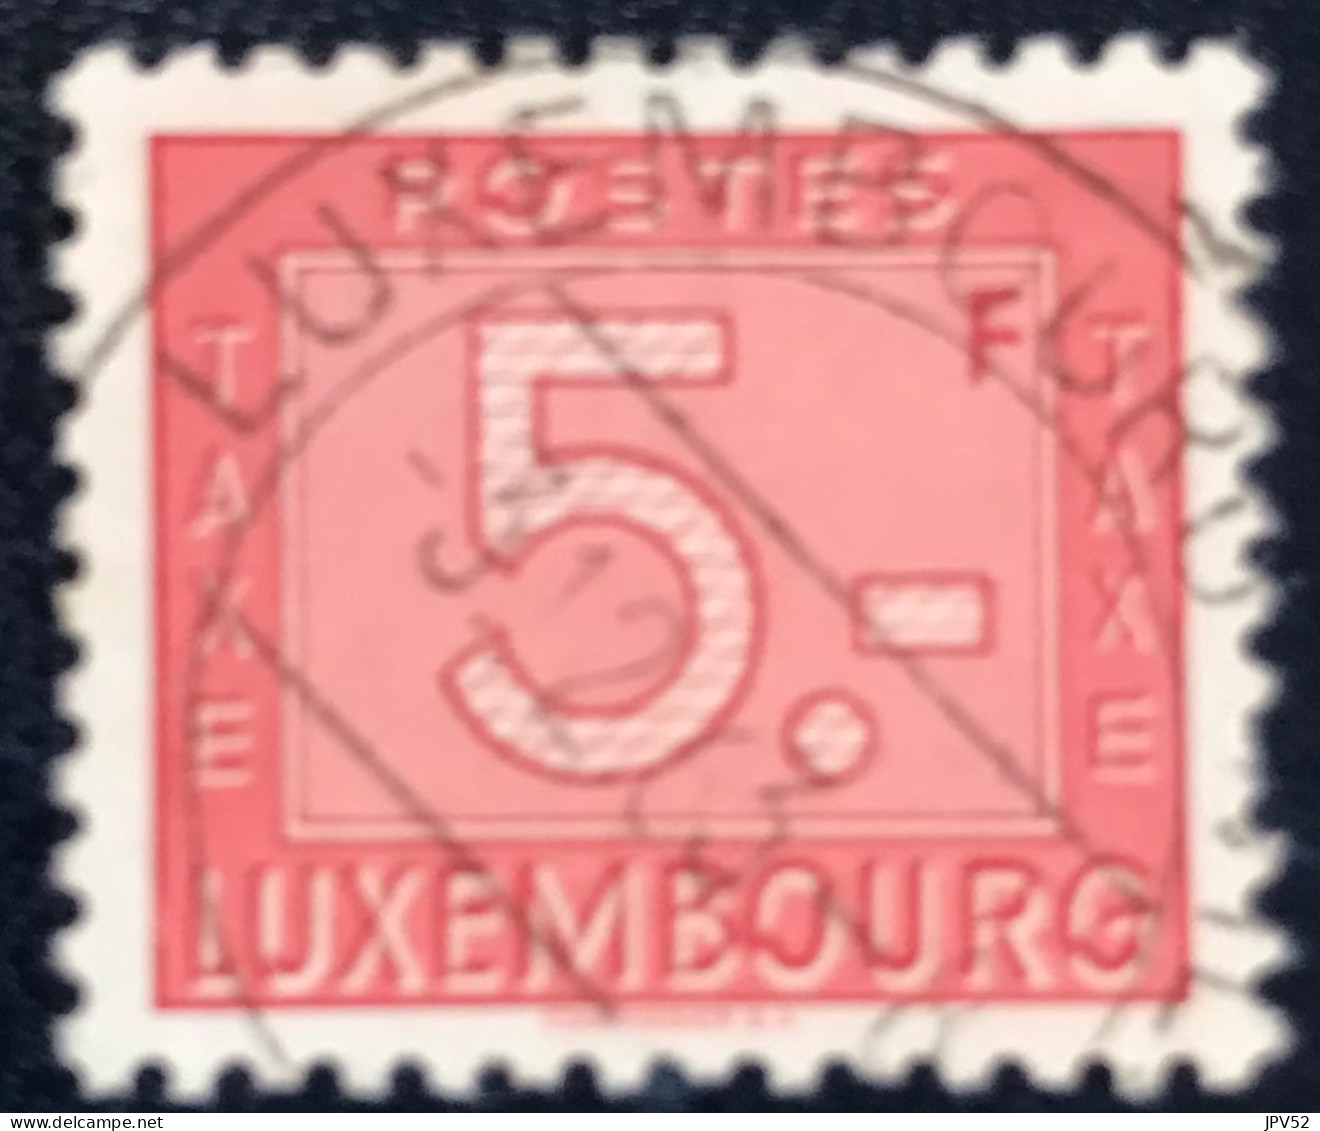 Luxembourg - Luxemburg - C18/33 - 1946 - (°)used - Michel 34 - Strafport - Cijfer - LUXEMBOURG - Strafport